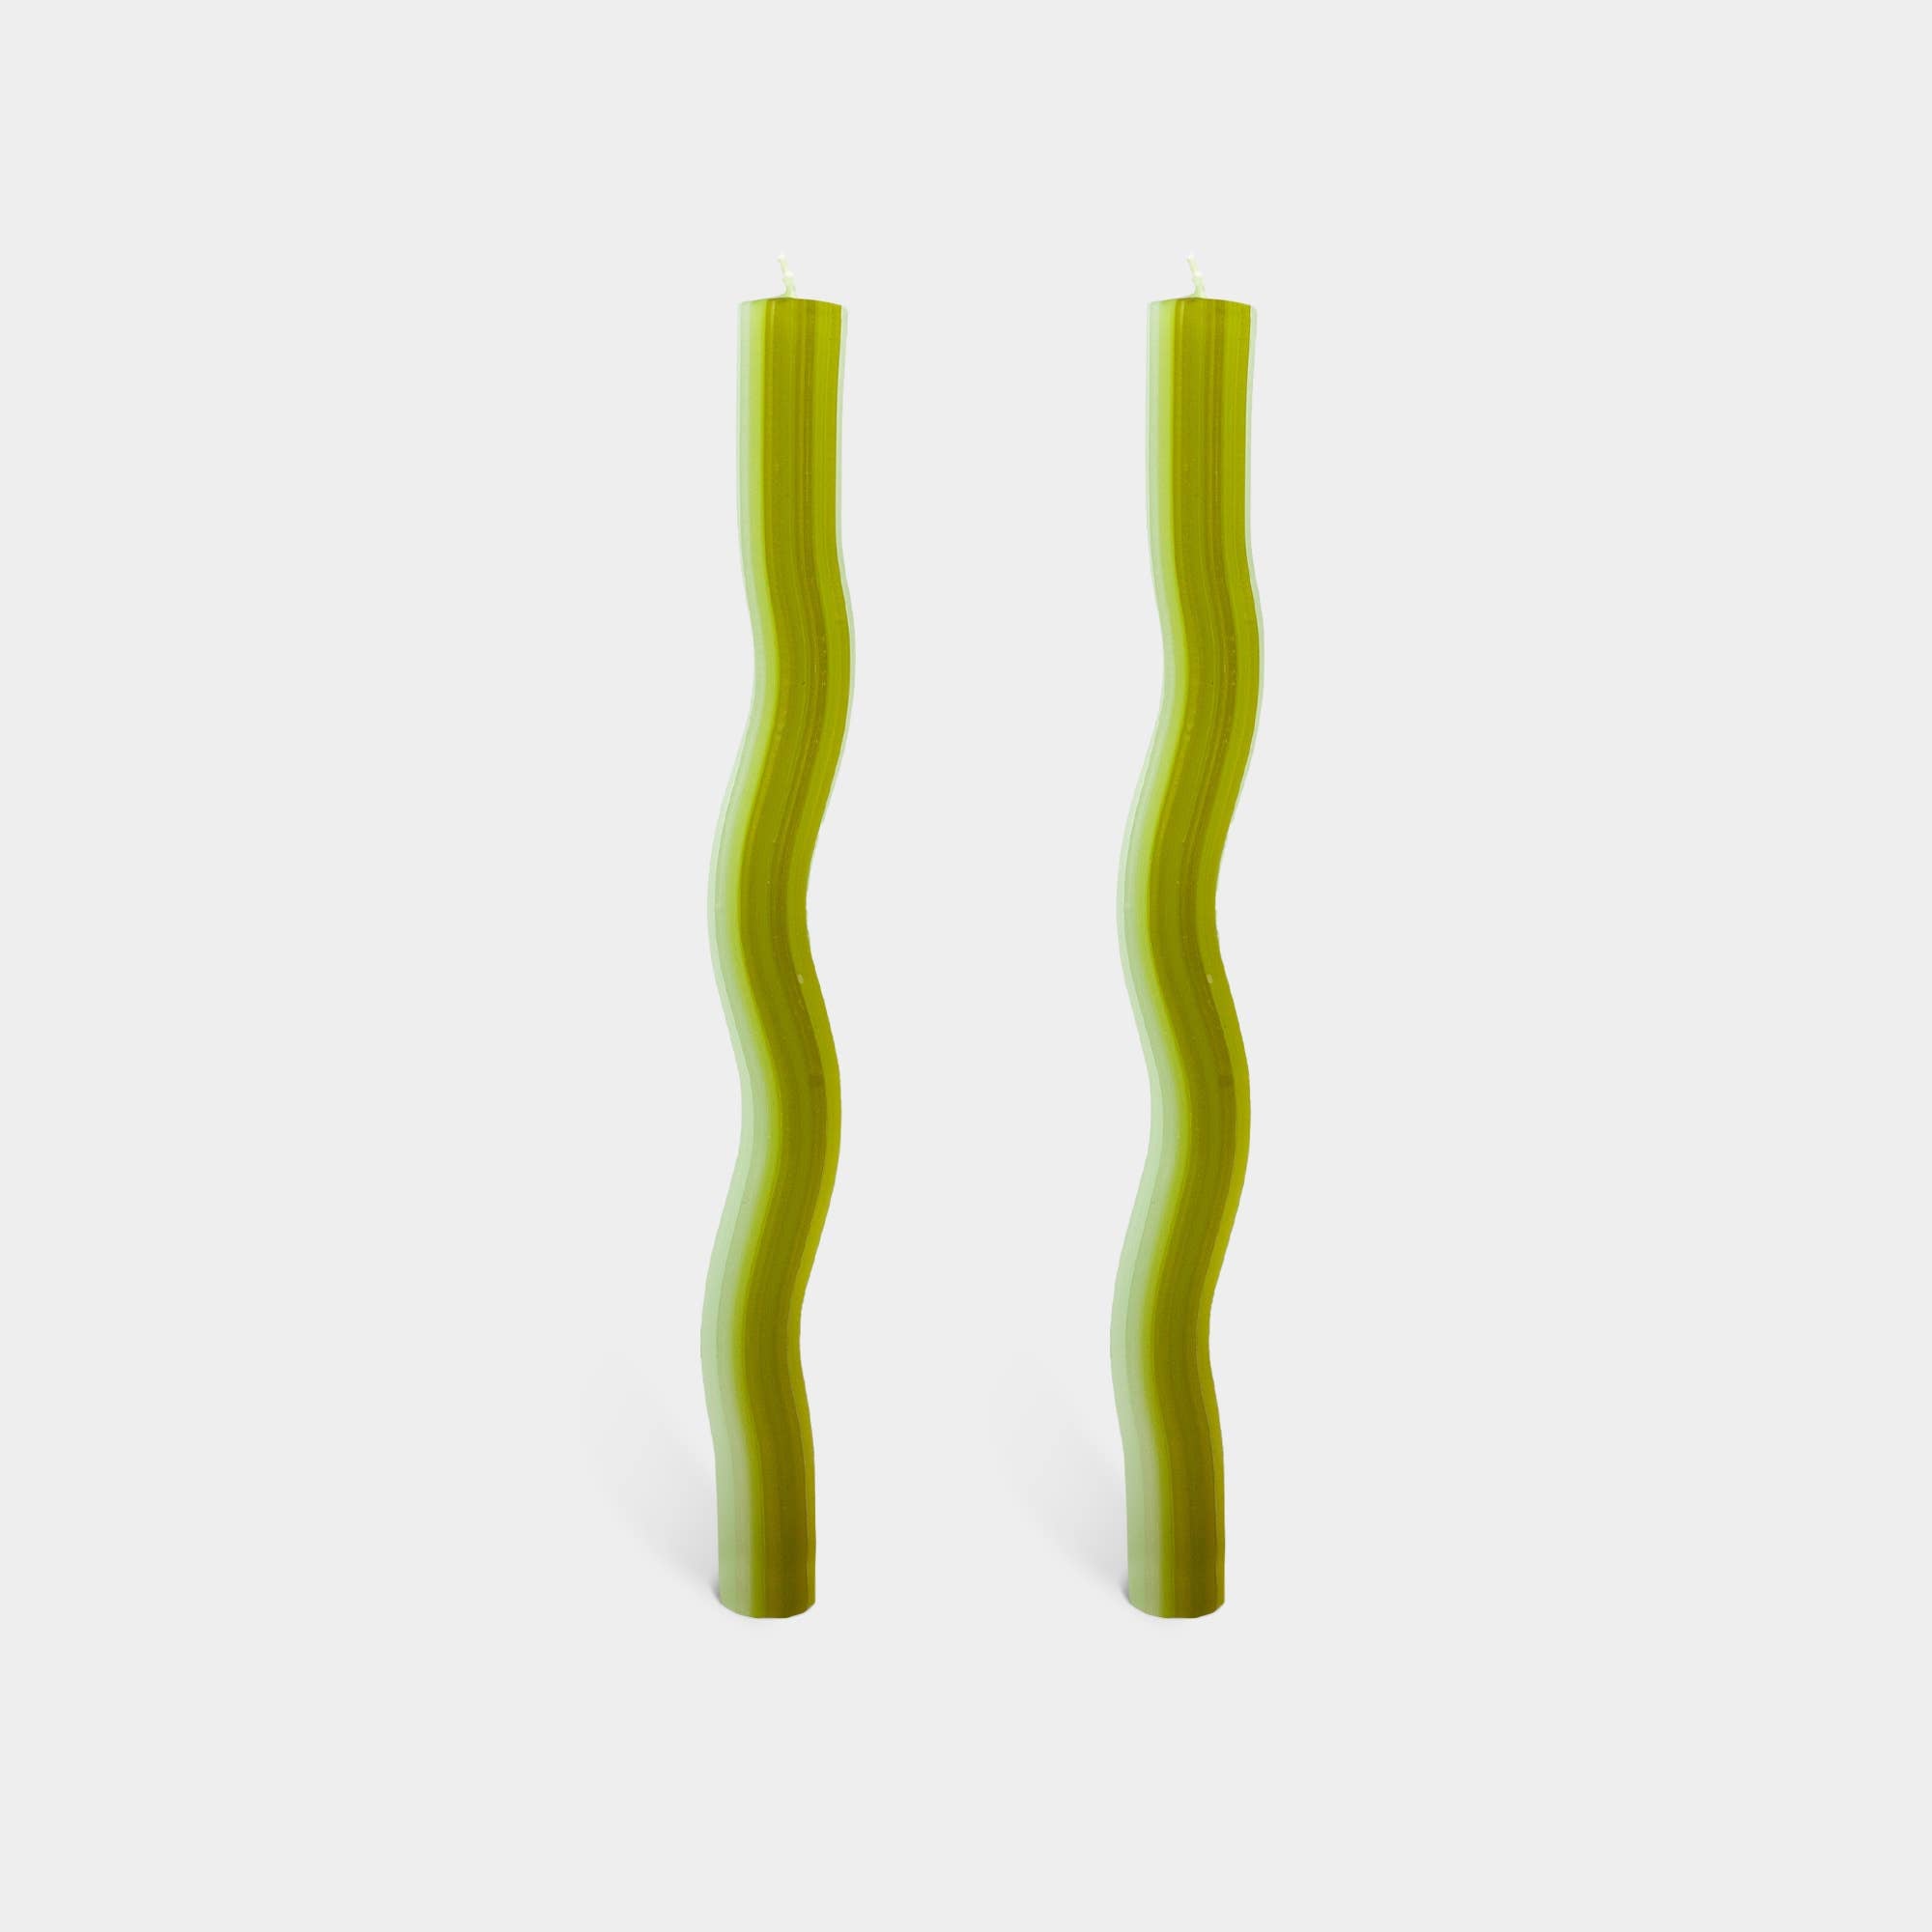 Wiggle Candles by Lex Pott - Green (2 pack)